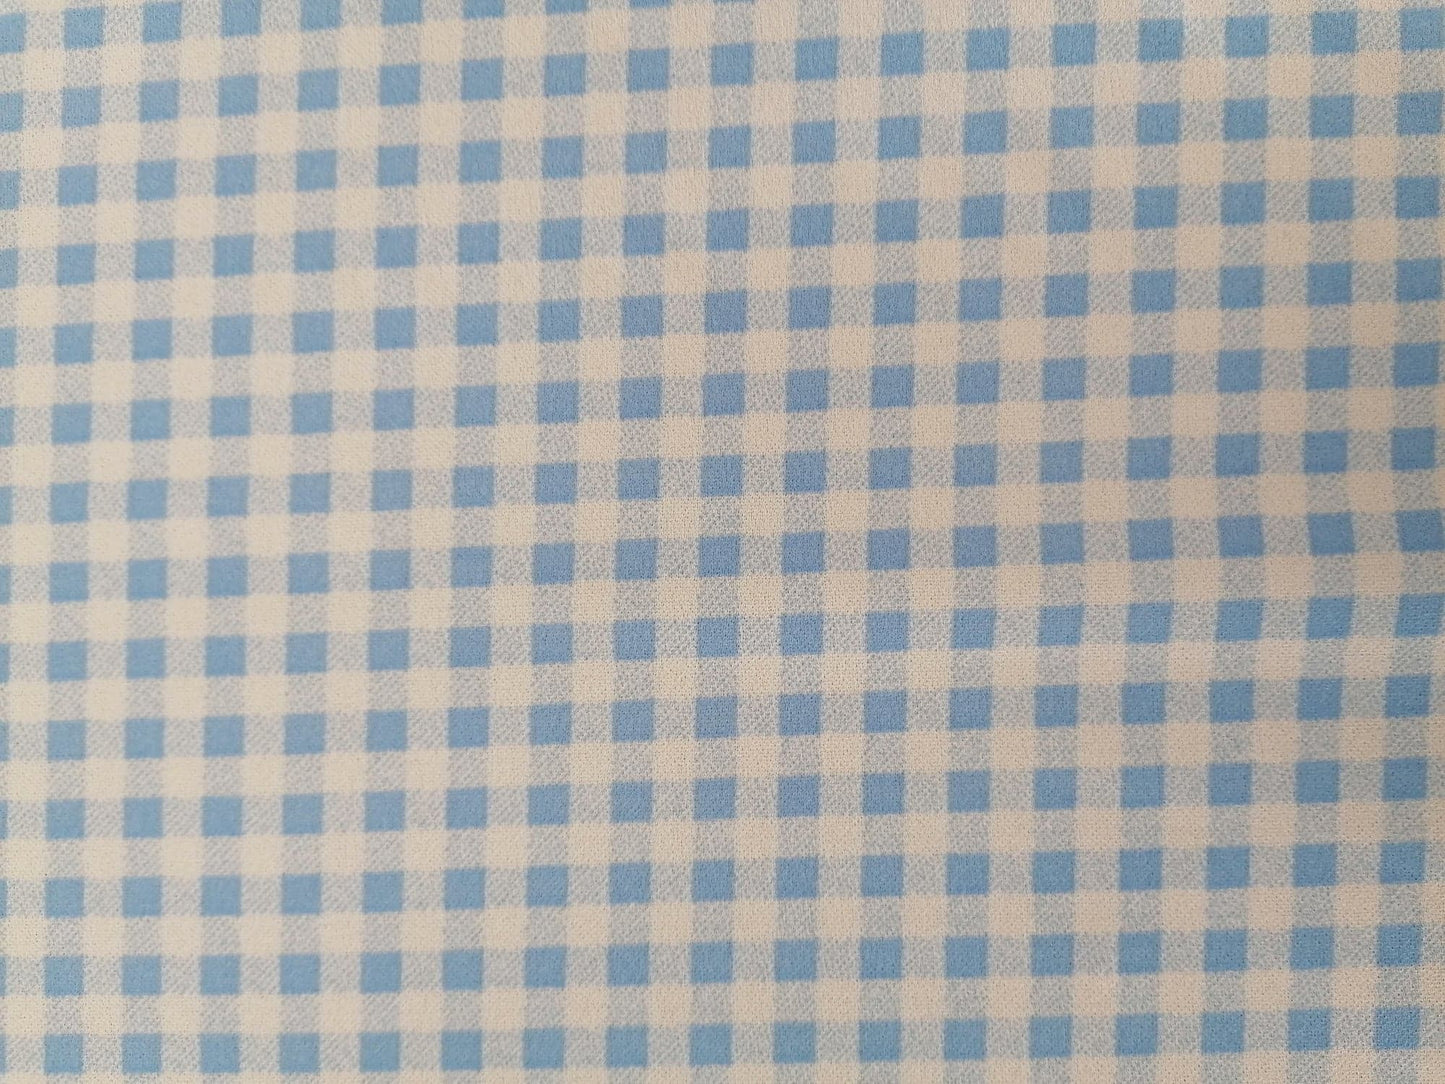 Clearance - Scuba Crepe - Gingham - Blue/White - 61" Wide - Sold As A 6 Metre Piece